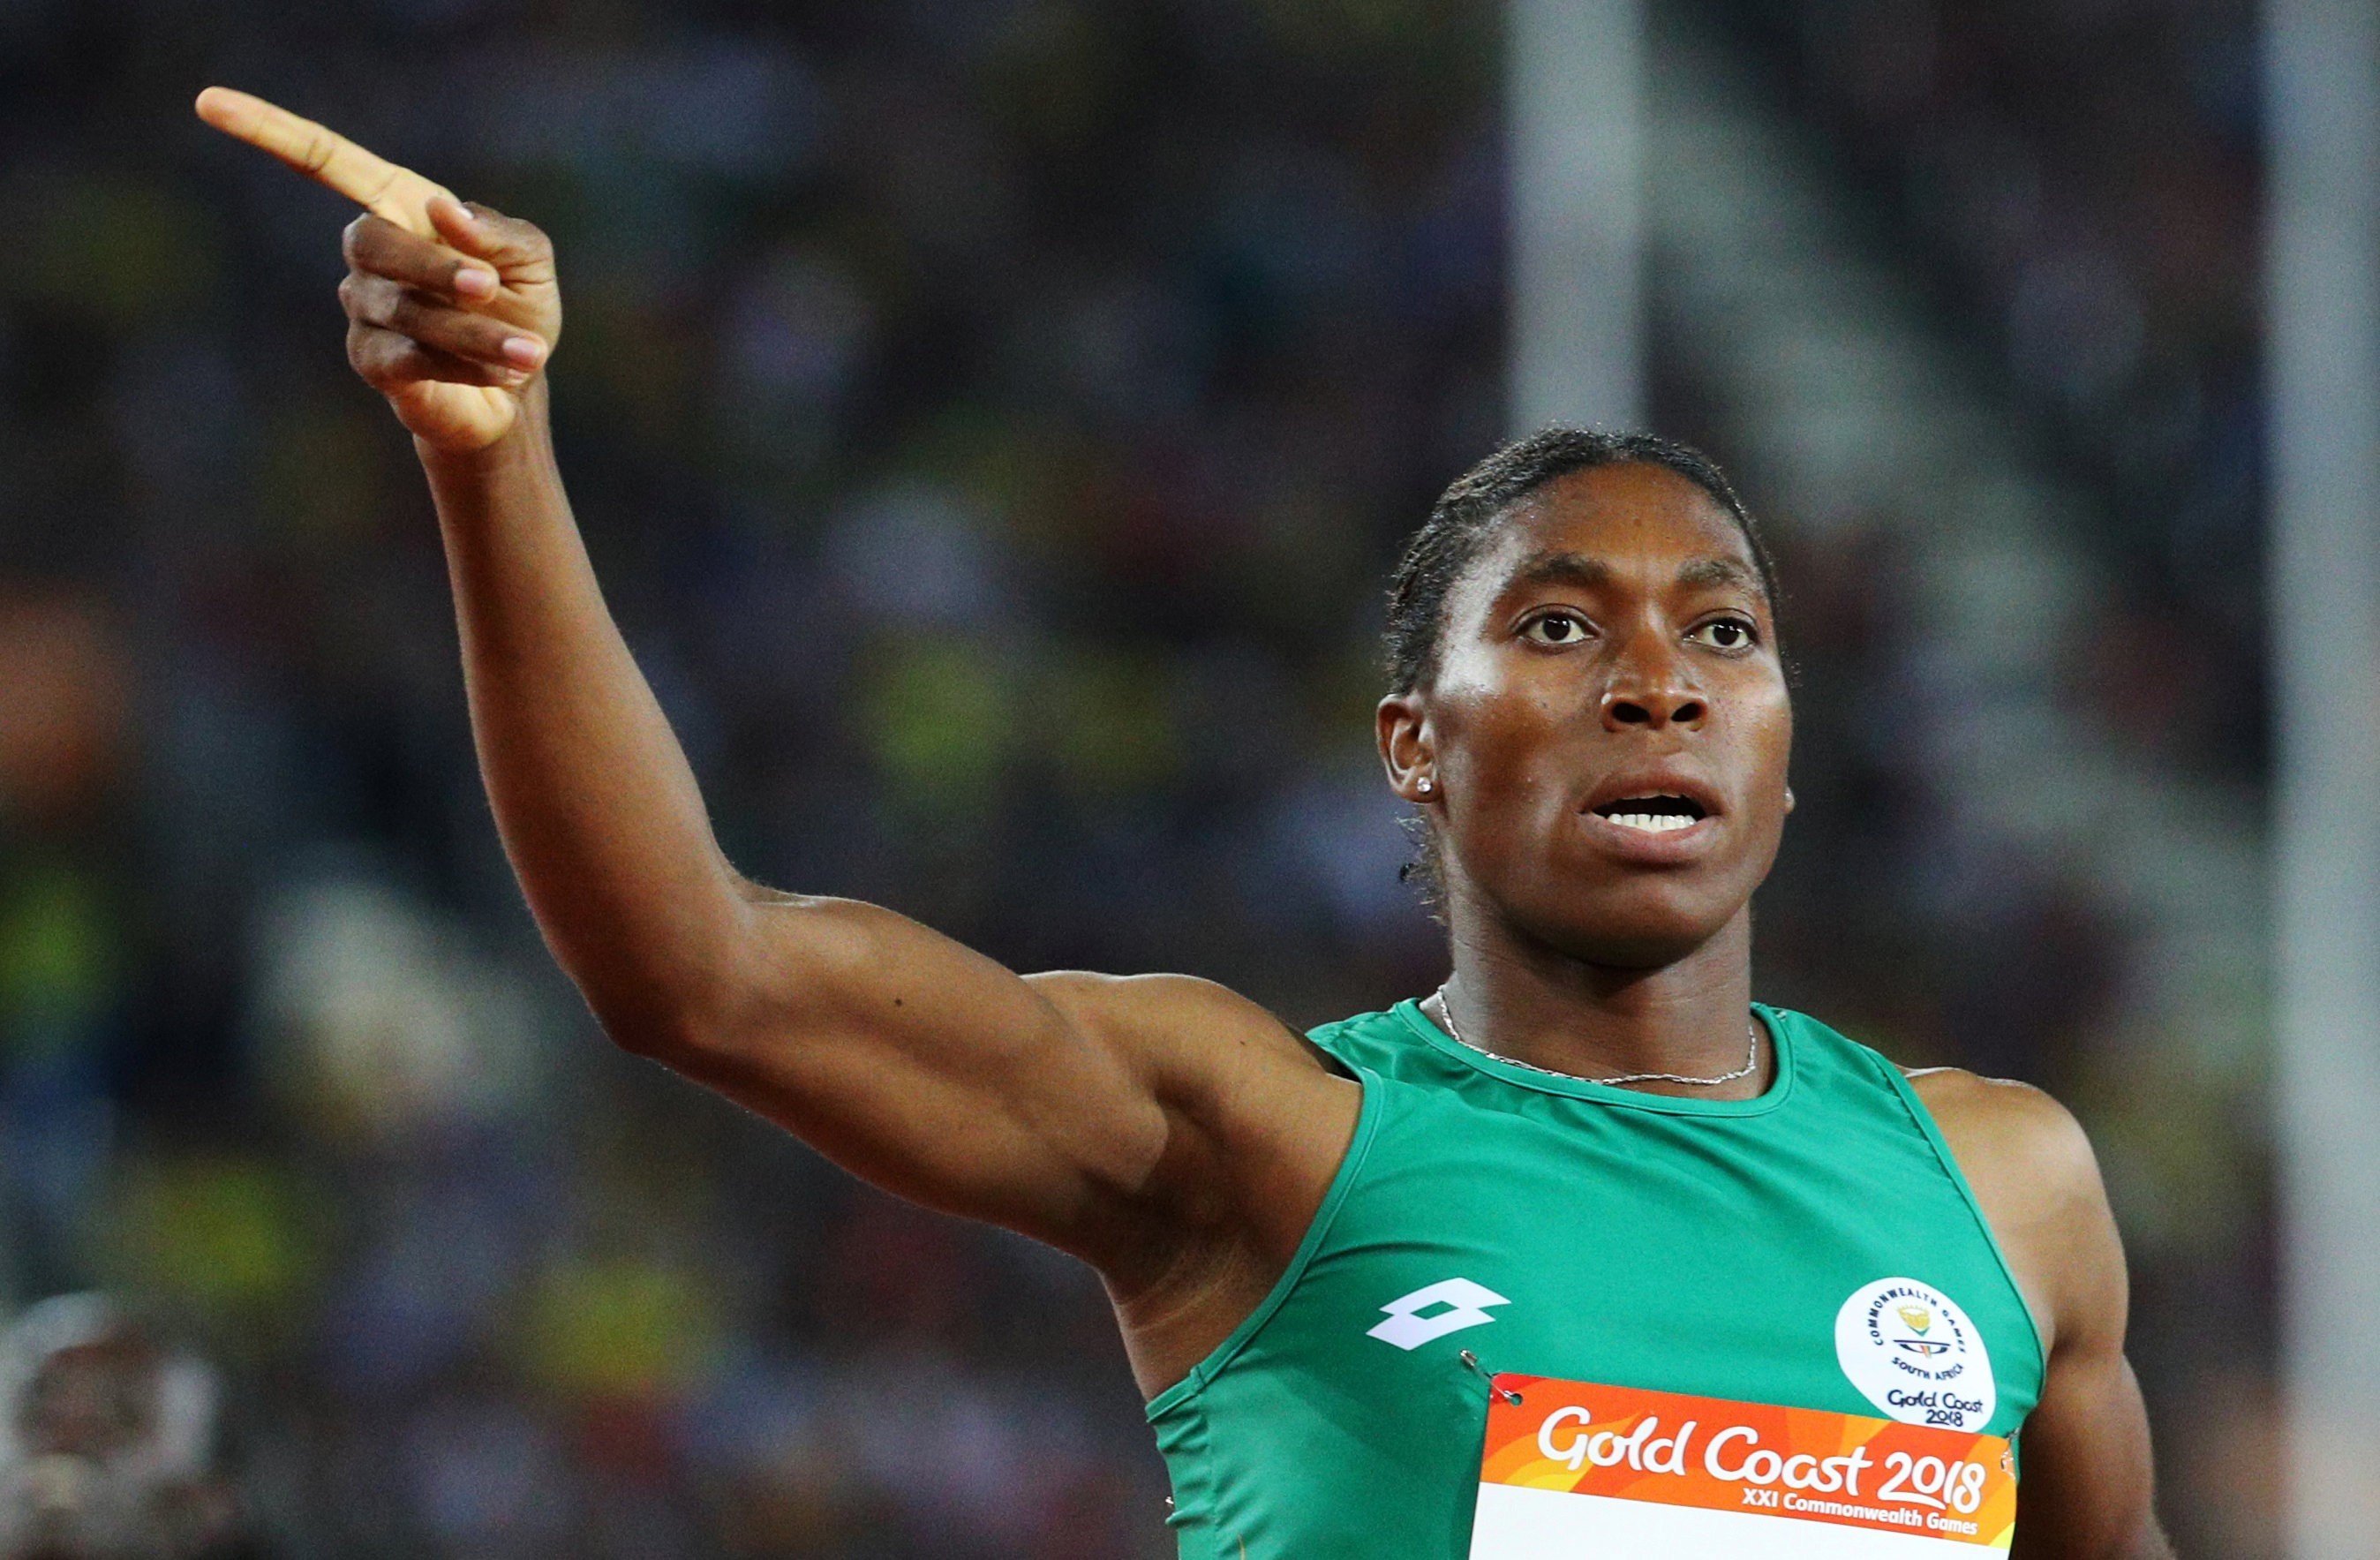 Once again, South African runner Caster Semenya finds her athletic achievements being questioned. Photo: Reuters